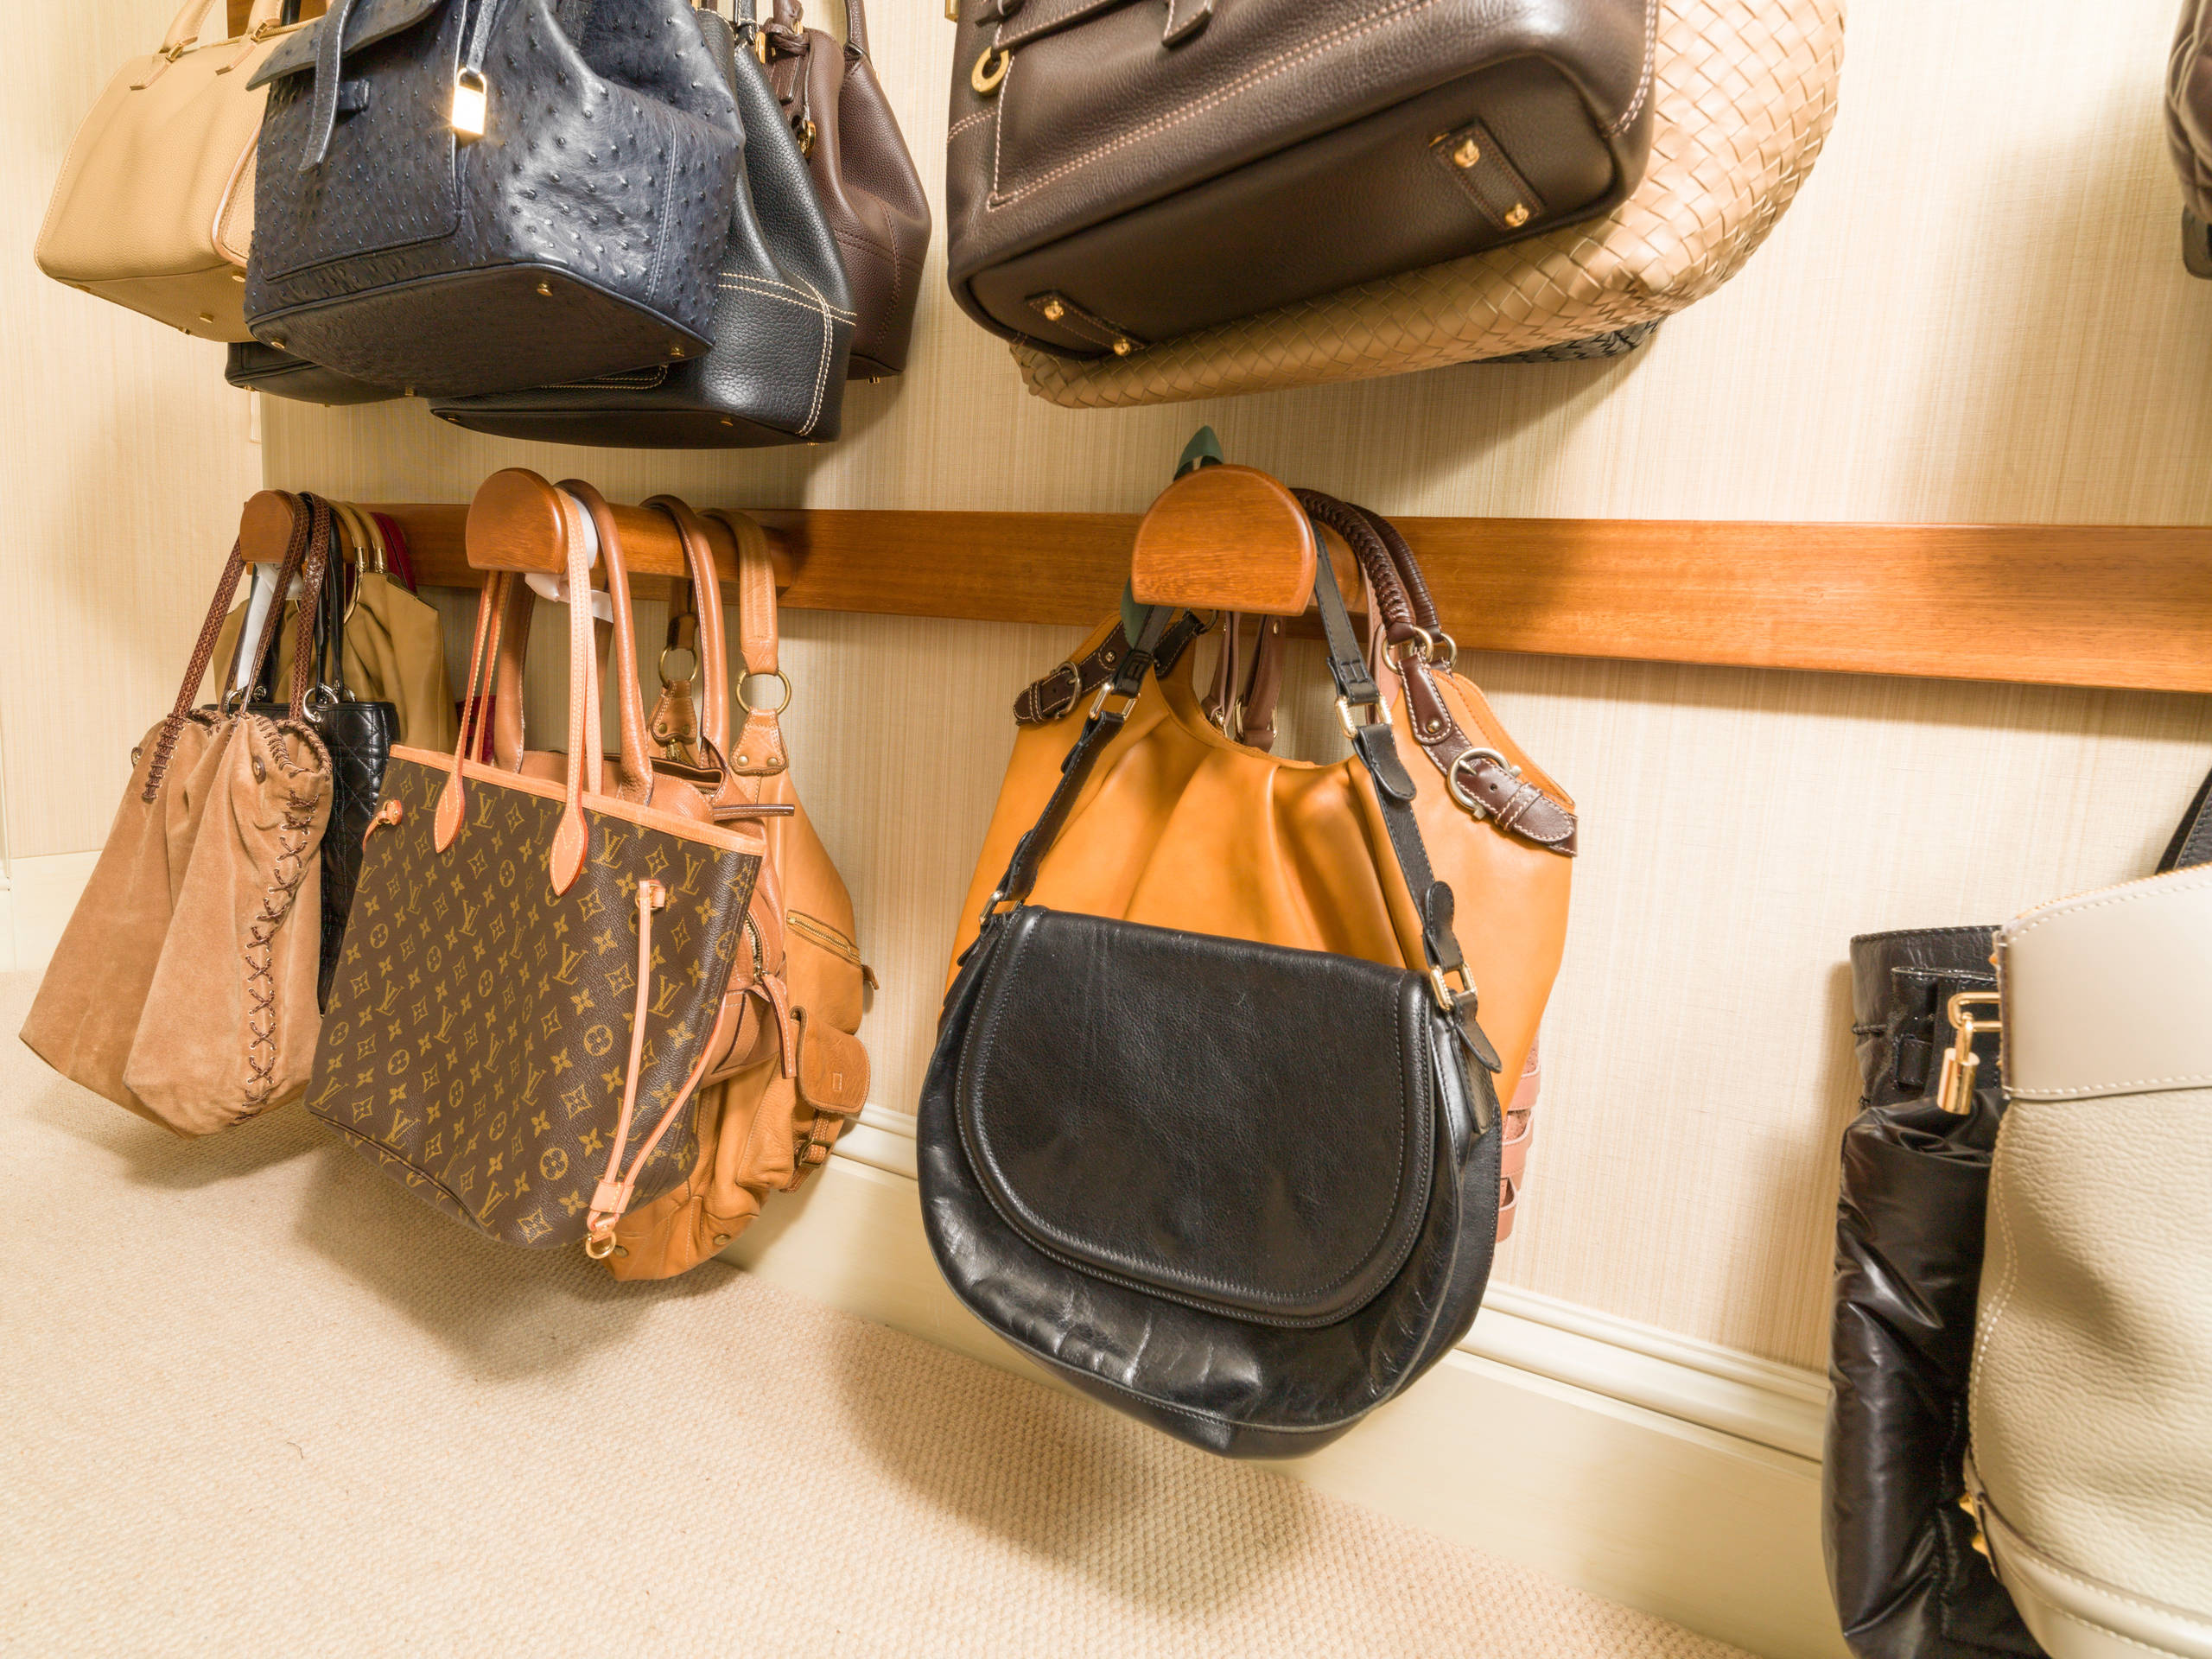 Walk in Closet with storage for Shoes and Handbags designed and made by Tim Wood